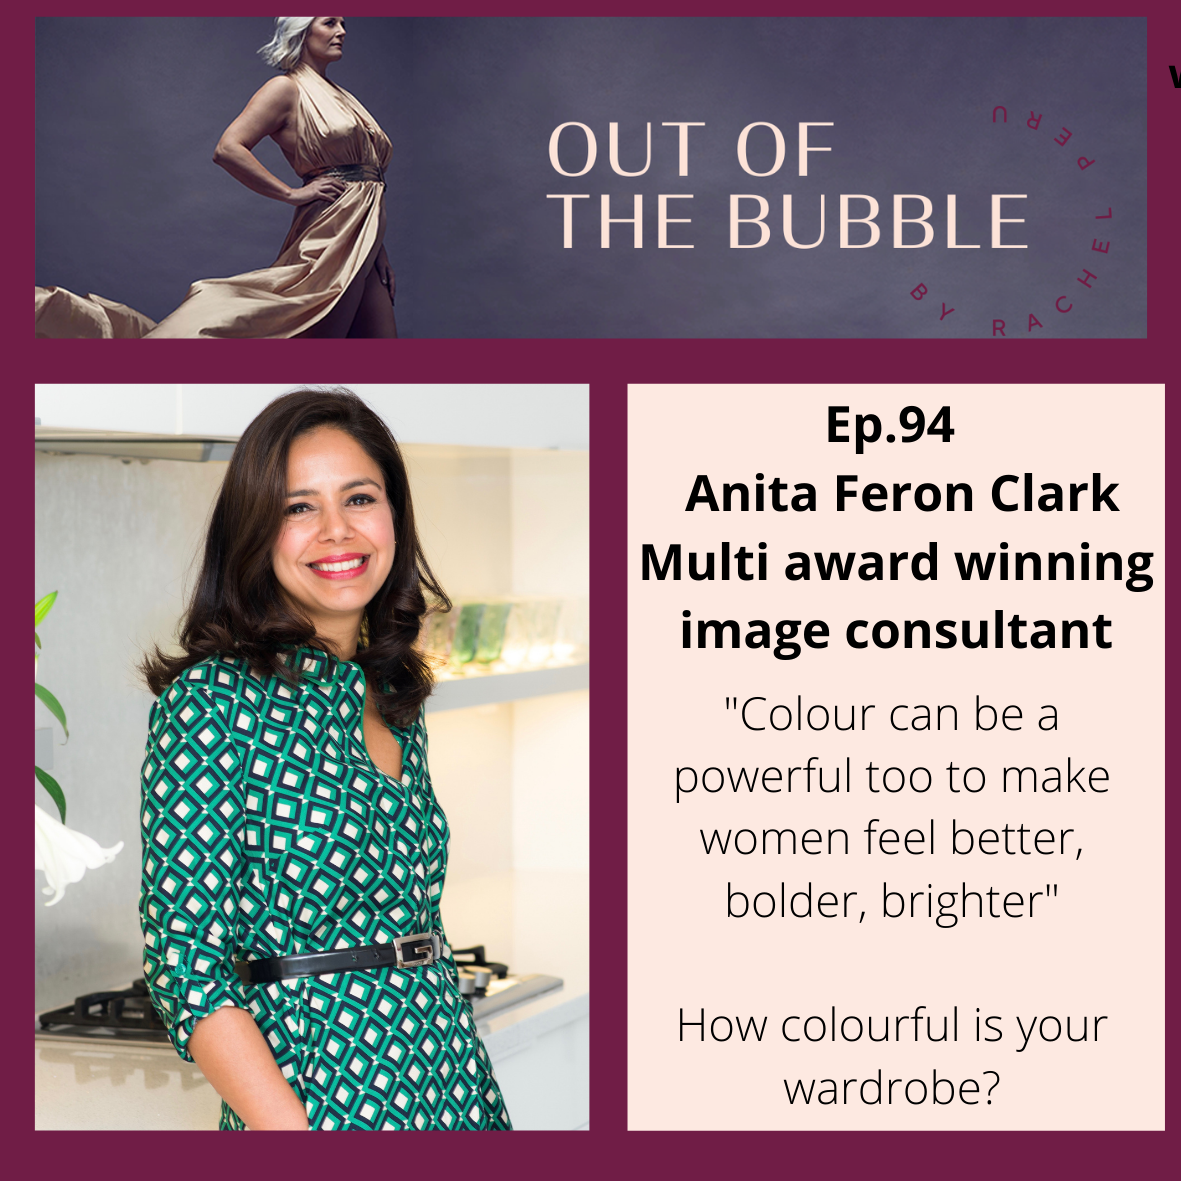 Ep.94 Liberte Free to Be,Finding Confidence in Your Wardrobe with personal stylist, Anita Feron Clark